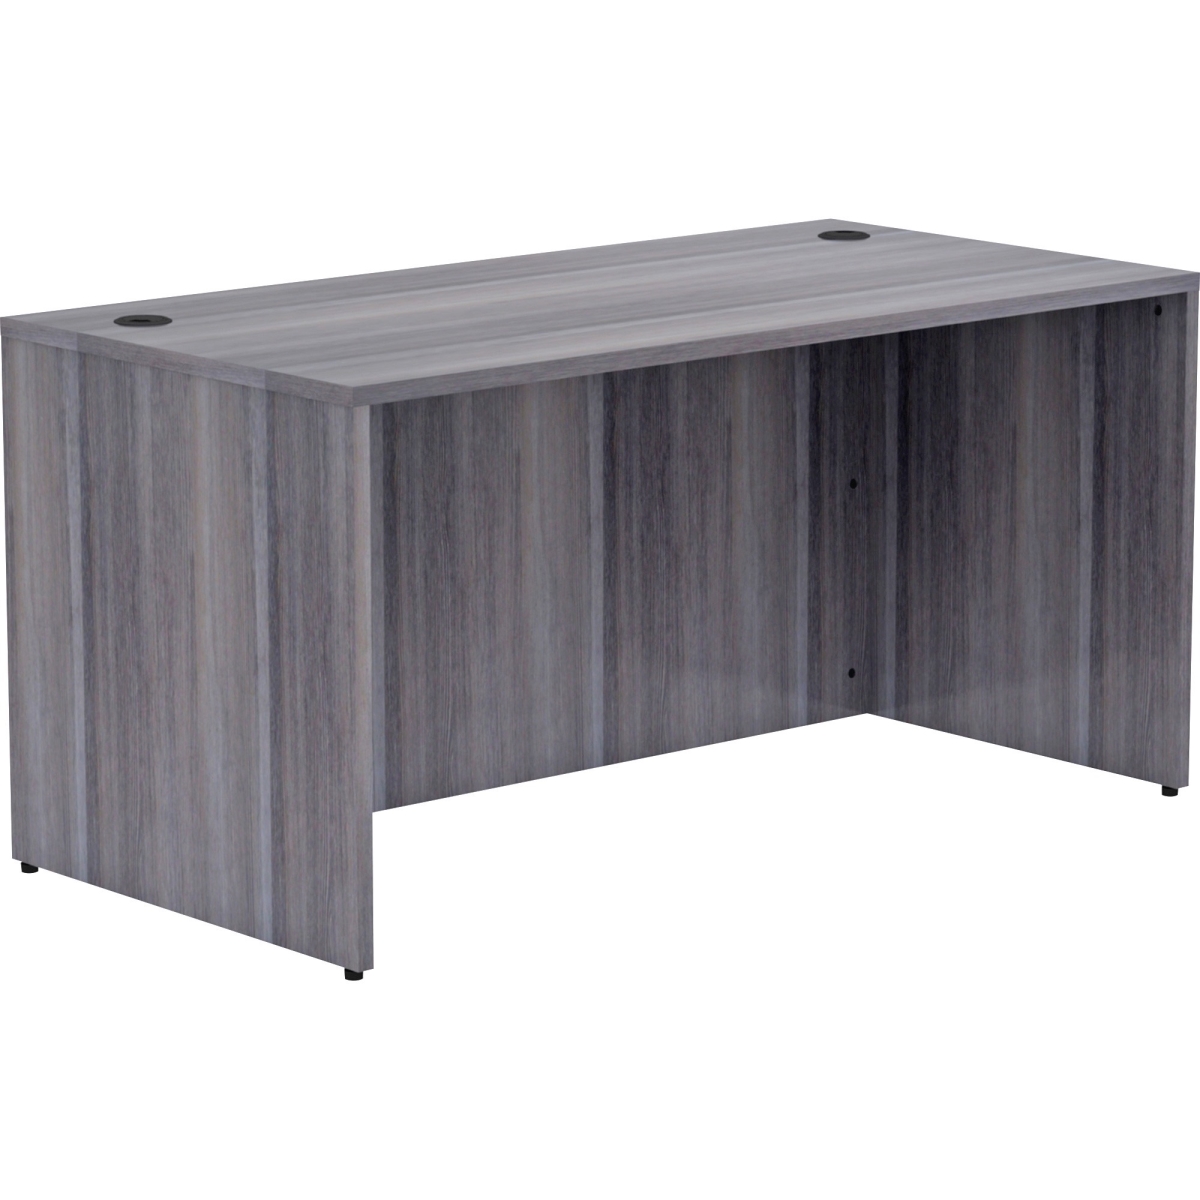 Llr69547 Weathered Charcoal Laminate Desking - Charcol - 29.5 X 66 X 30 In.